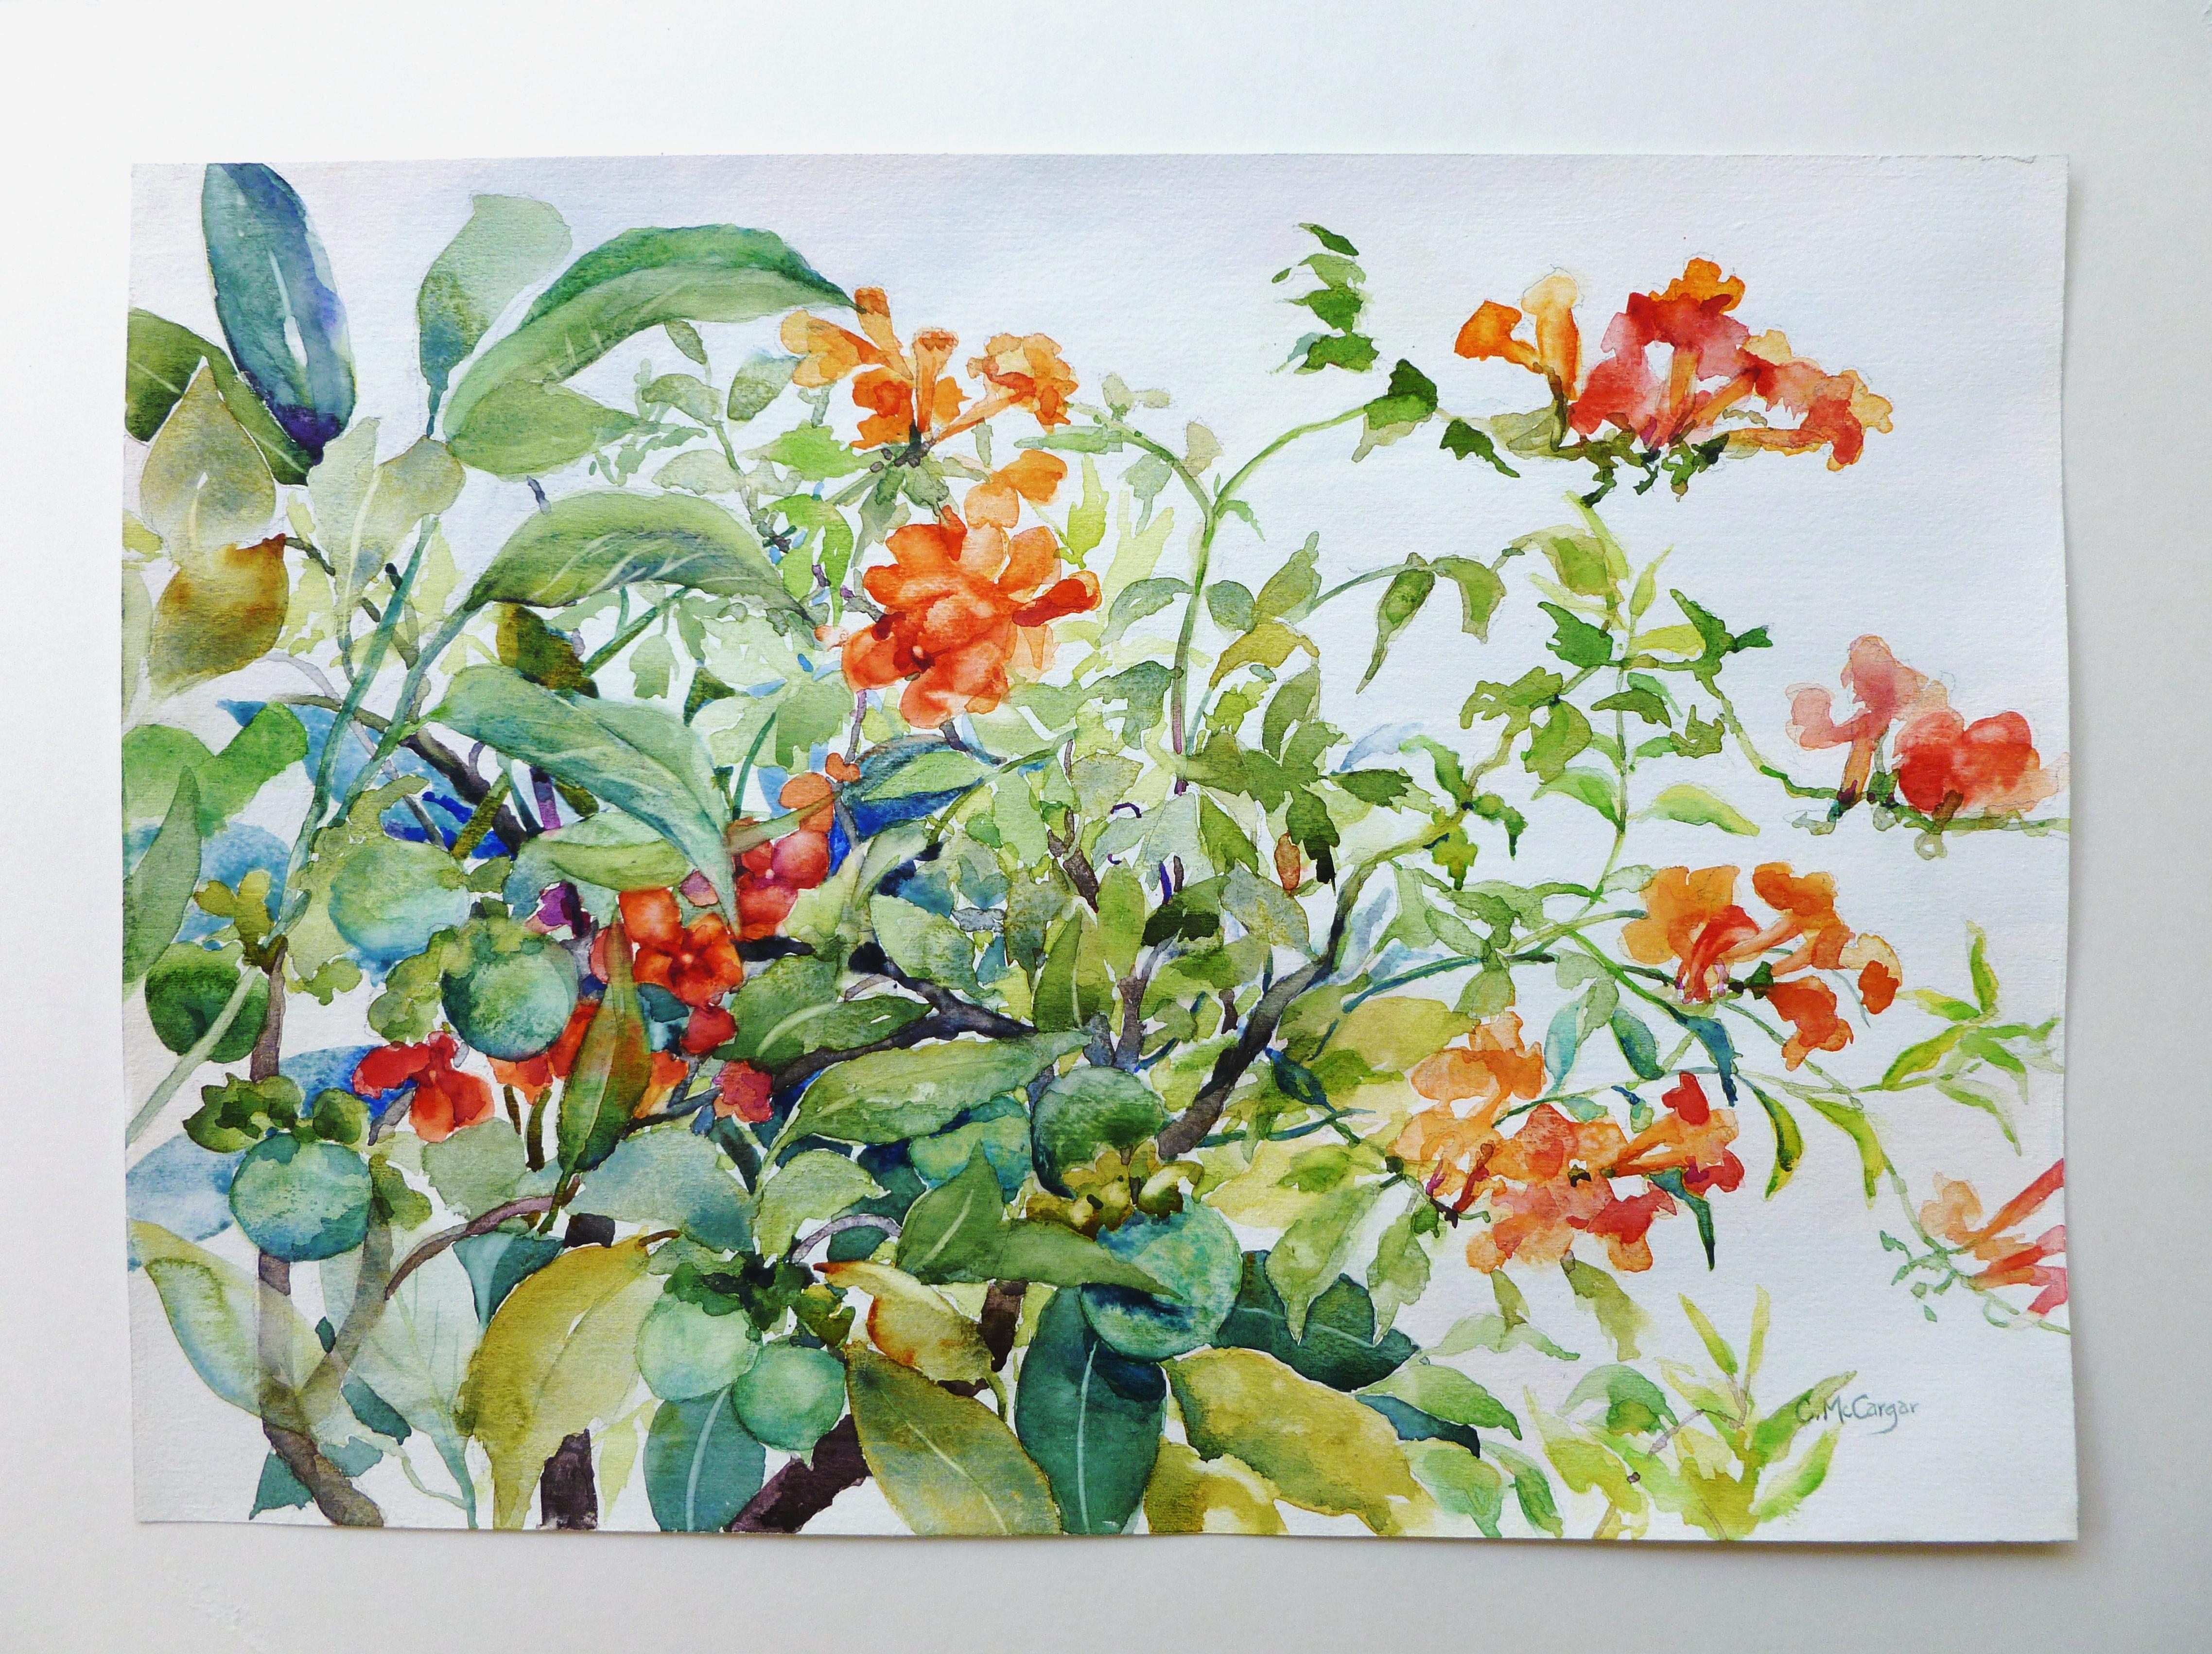 <p>Artist Comments<br> I started this piece en plein air in an artist friend's garden. She has planted fruit trees and flowering plants in a charmingly entwined situation, each producing its beauties in season. This is my interpretation of the still